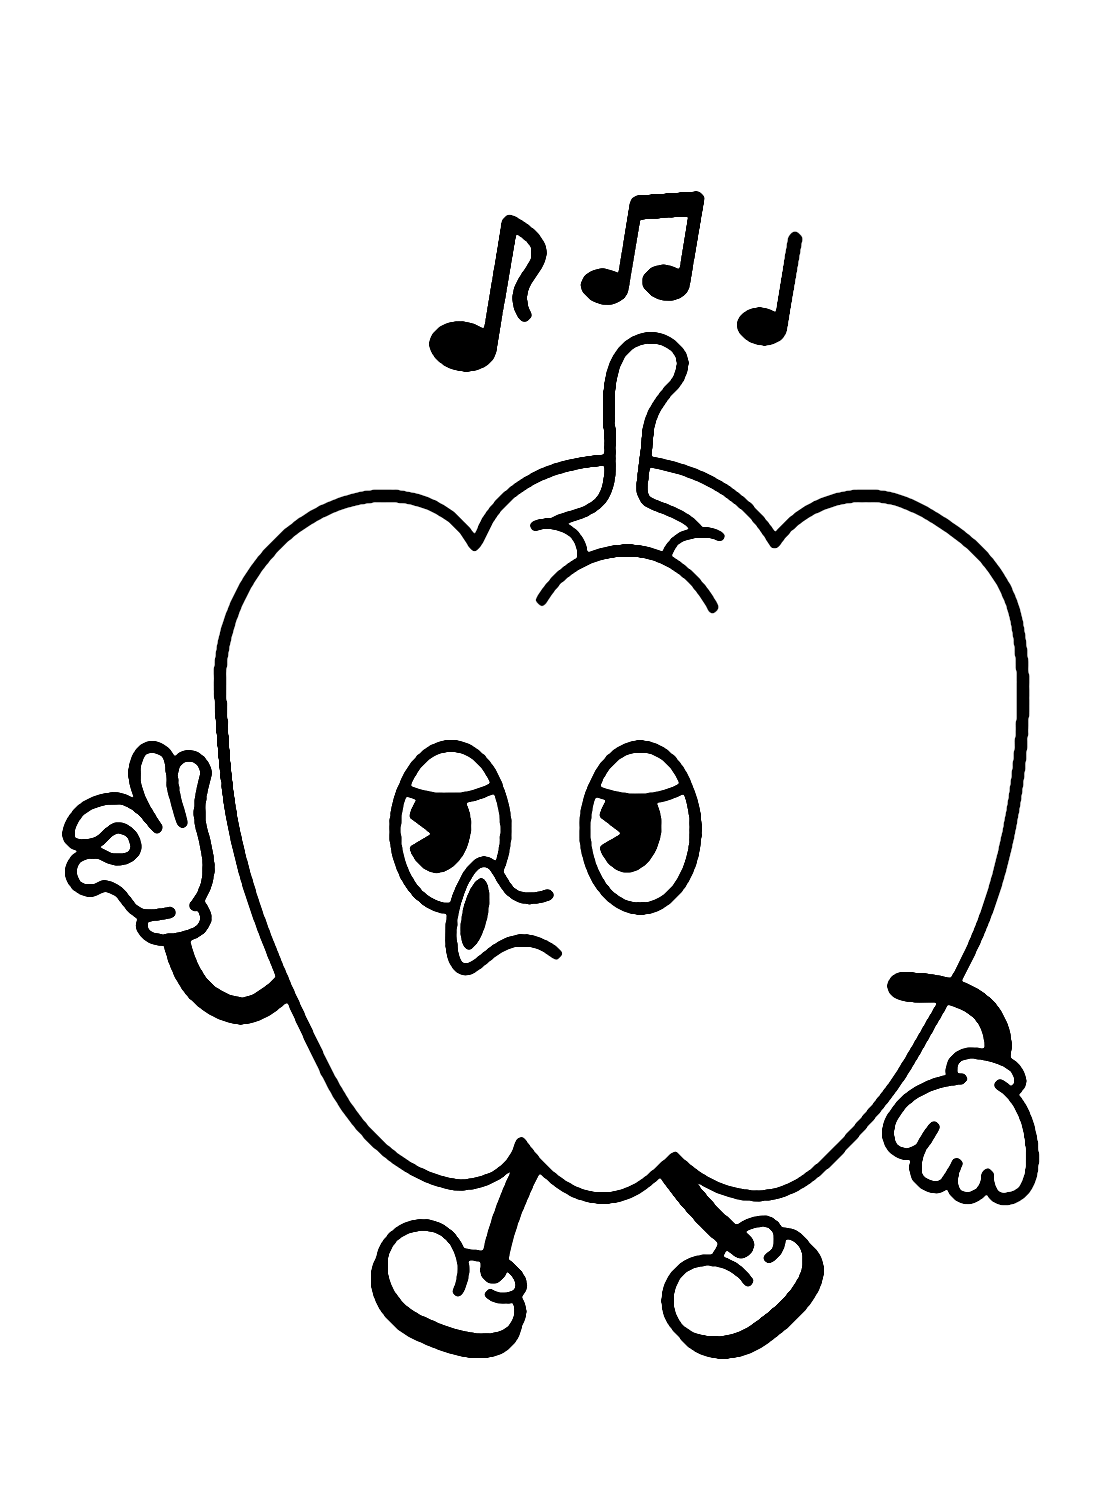 Cute Bell Pepper Coloring Page